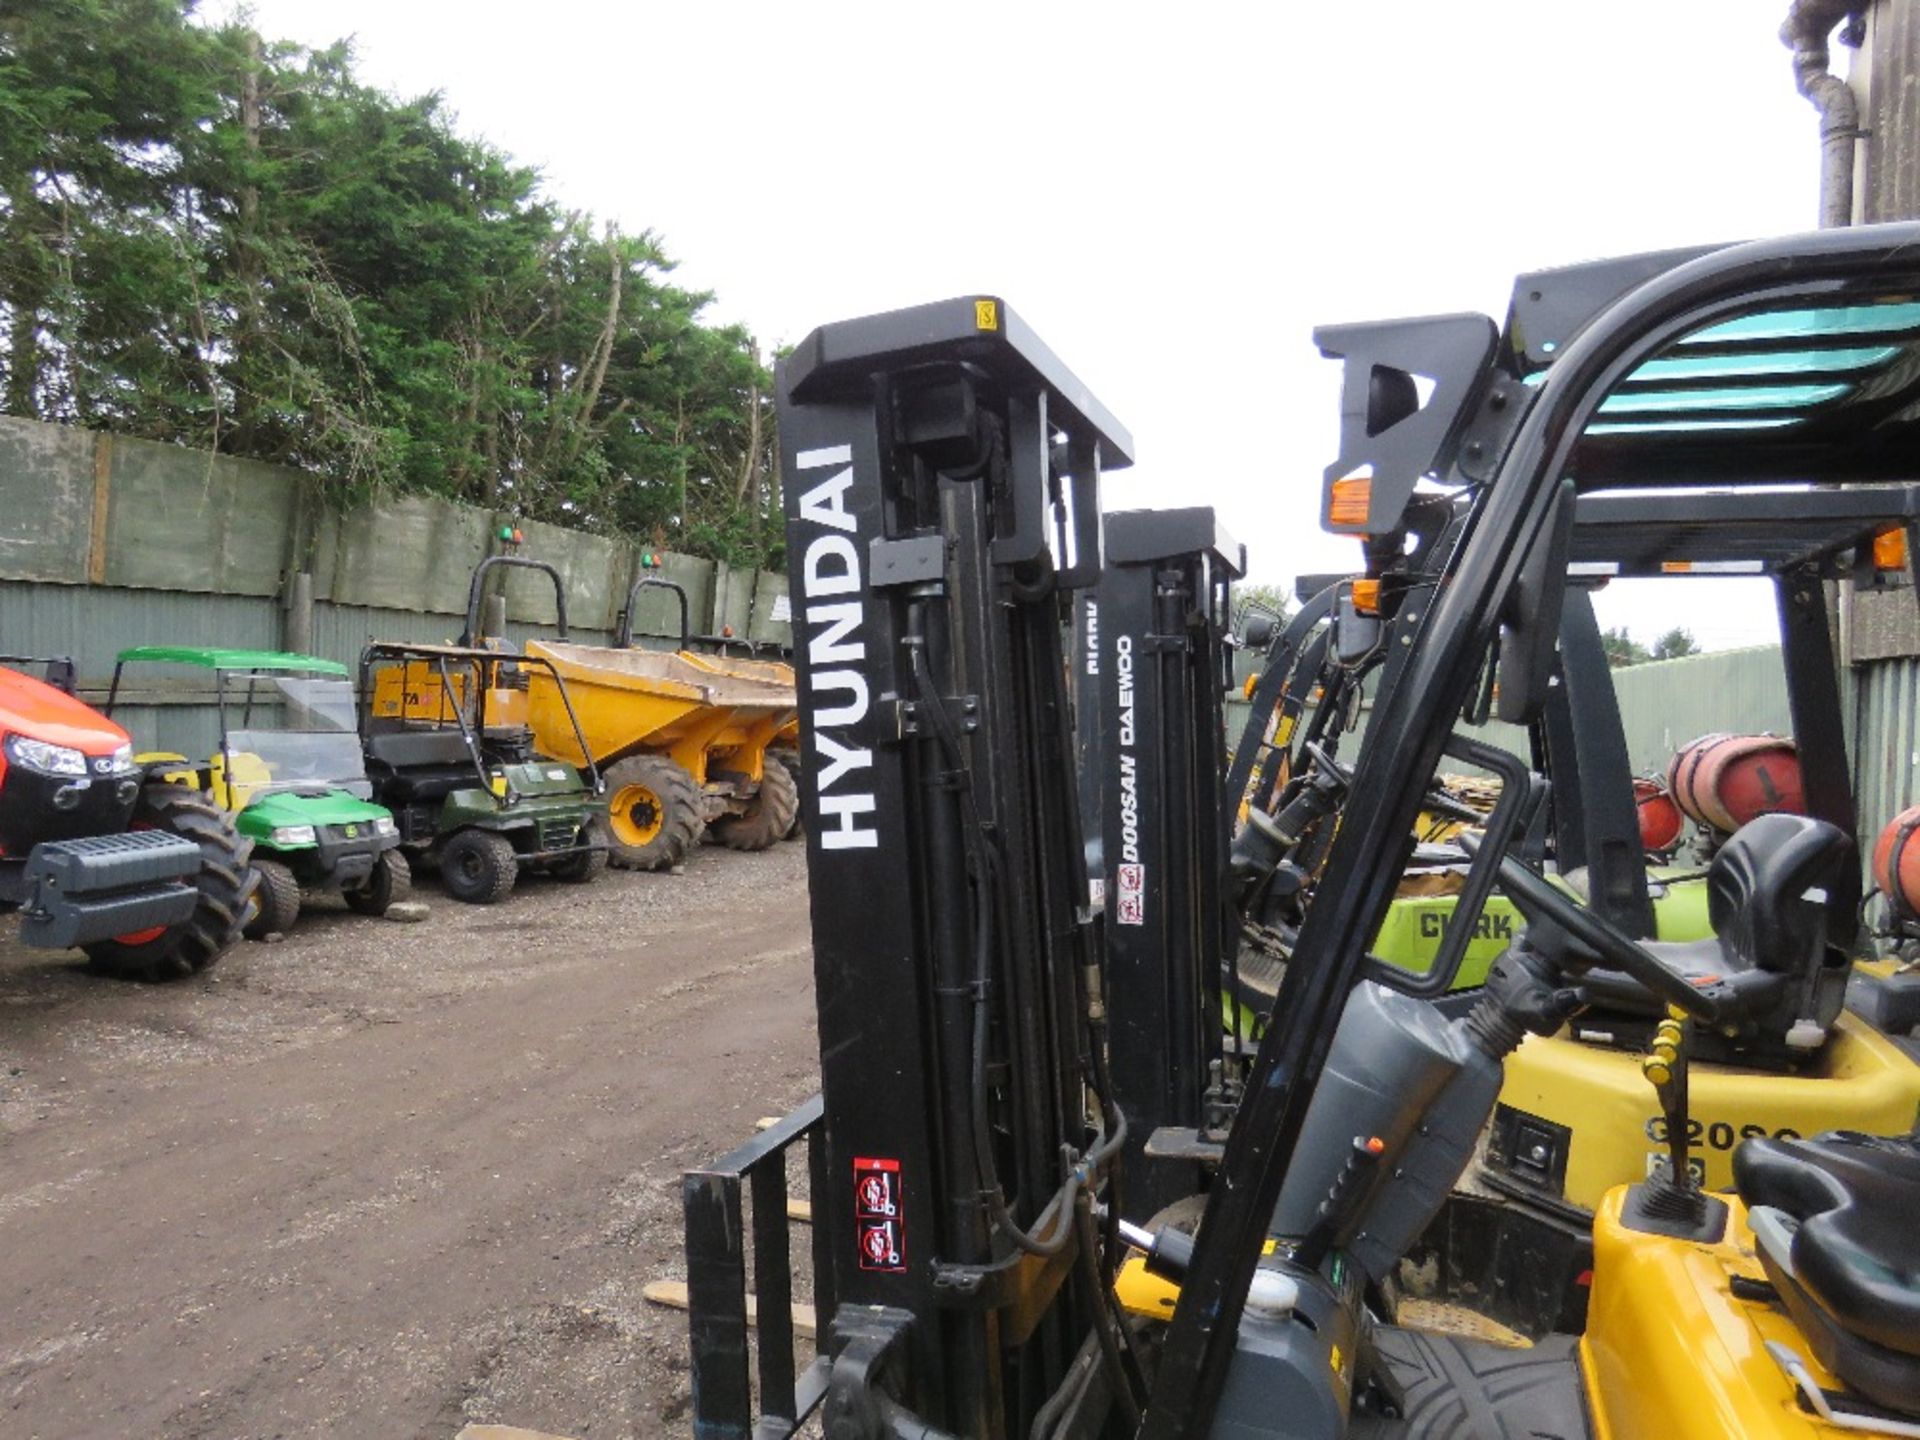 HYUNDAI 20L-7M GAS POWERED FORKLIFT TRUCK, YEAR 2018. 1600 REC HOURS APPROX. EXTRA SERVICE. - Image 4 of 11